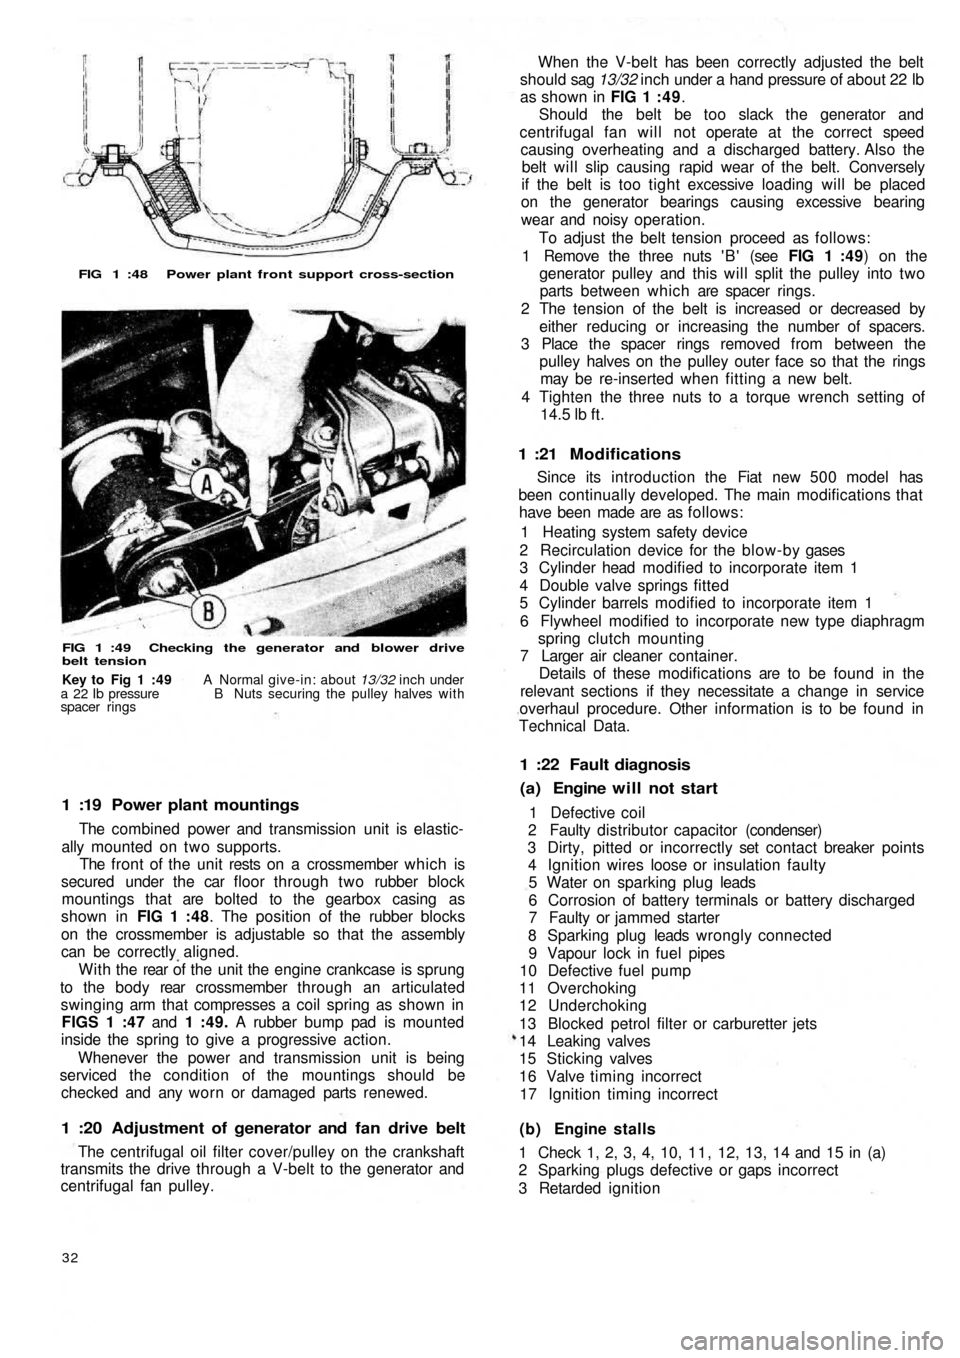 FIAT 500 1959 1.G Workshop Manual FIG 1 :48  Power plant front support cross-section
FIG 1 :49  Checking  the generator and  blower drive
belt tension
1 :19  Power plant mountings
The combined power and transmission unit is elastic-
a